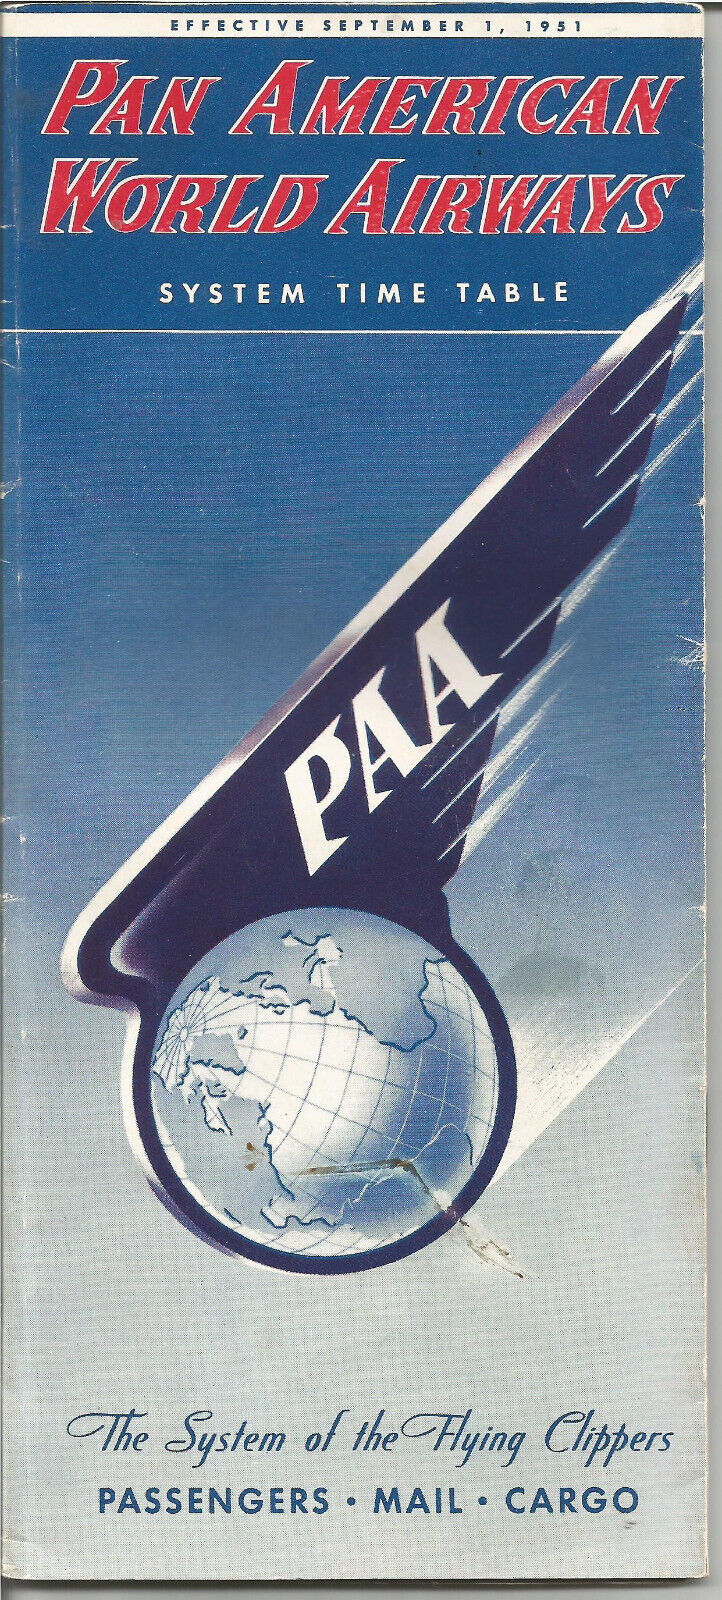 Pan American World Airways System Time Table Effective Sept. 1, 1951